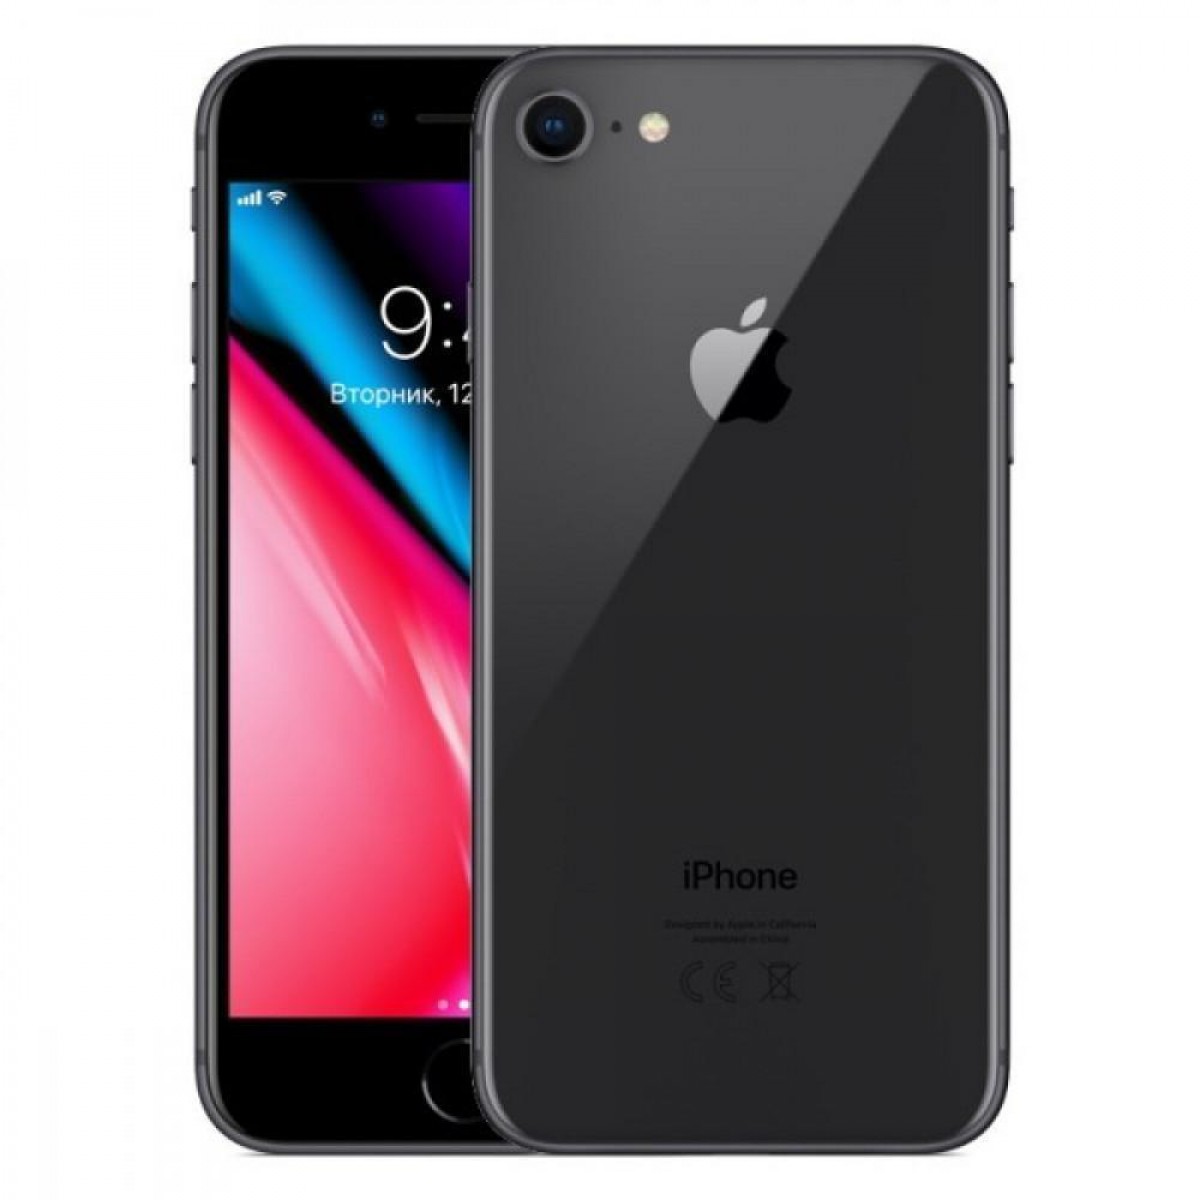 iPhone Space Gray 64 GB